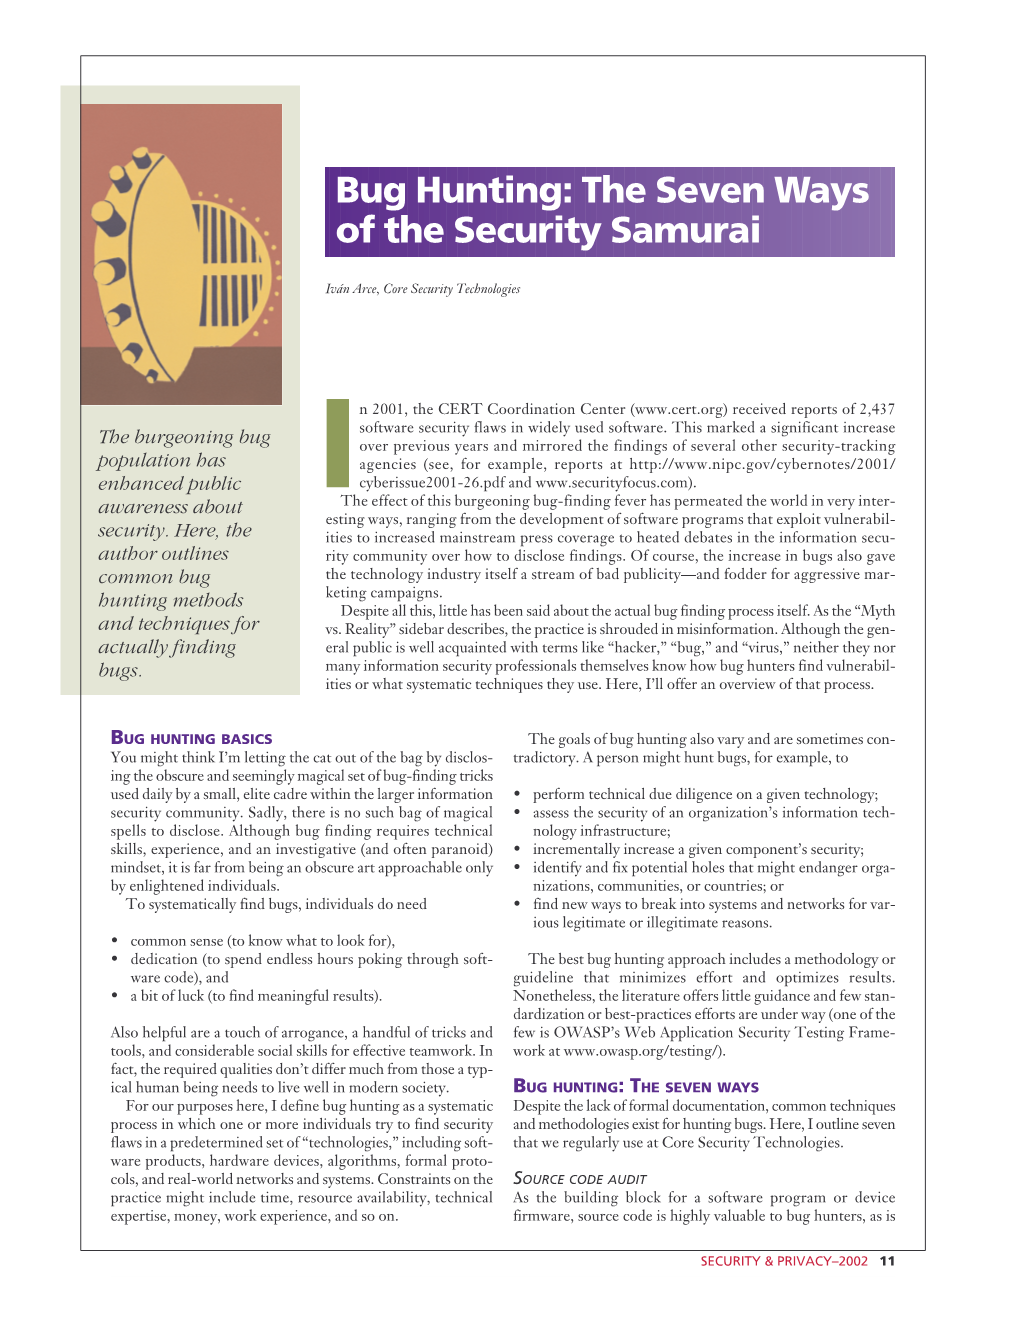 Bug Hunting: the Seven Ways of the Security Samurai